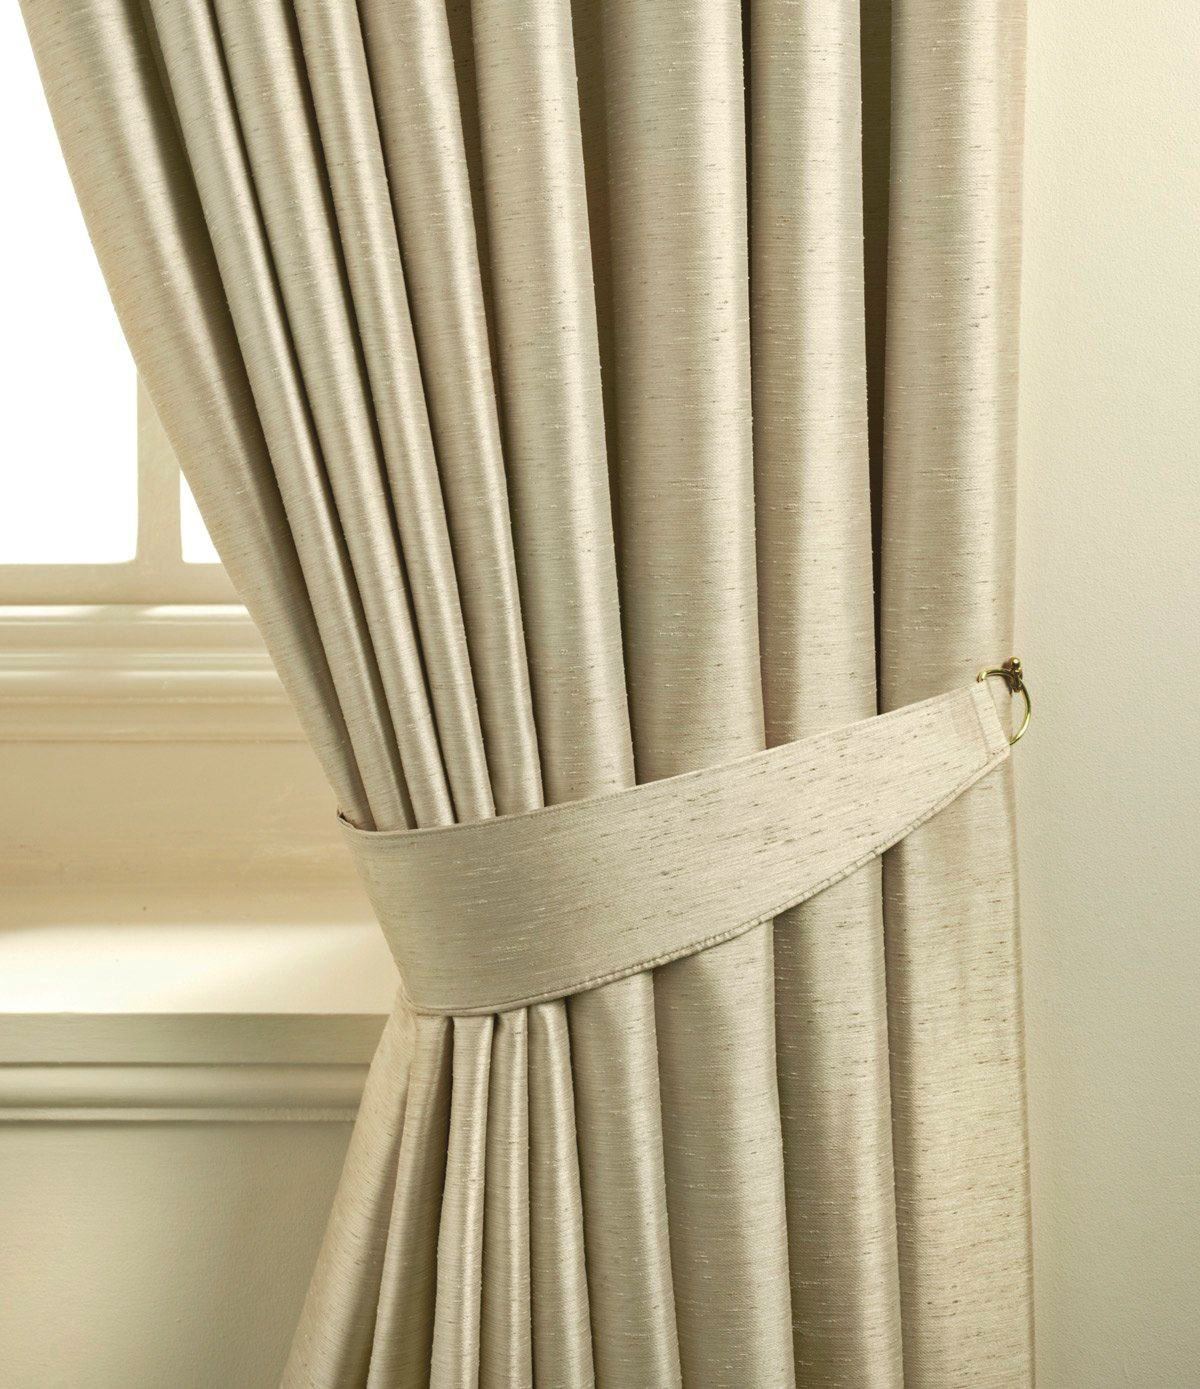 where-to-position-curtain-tie-backs